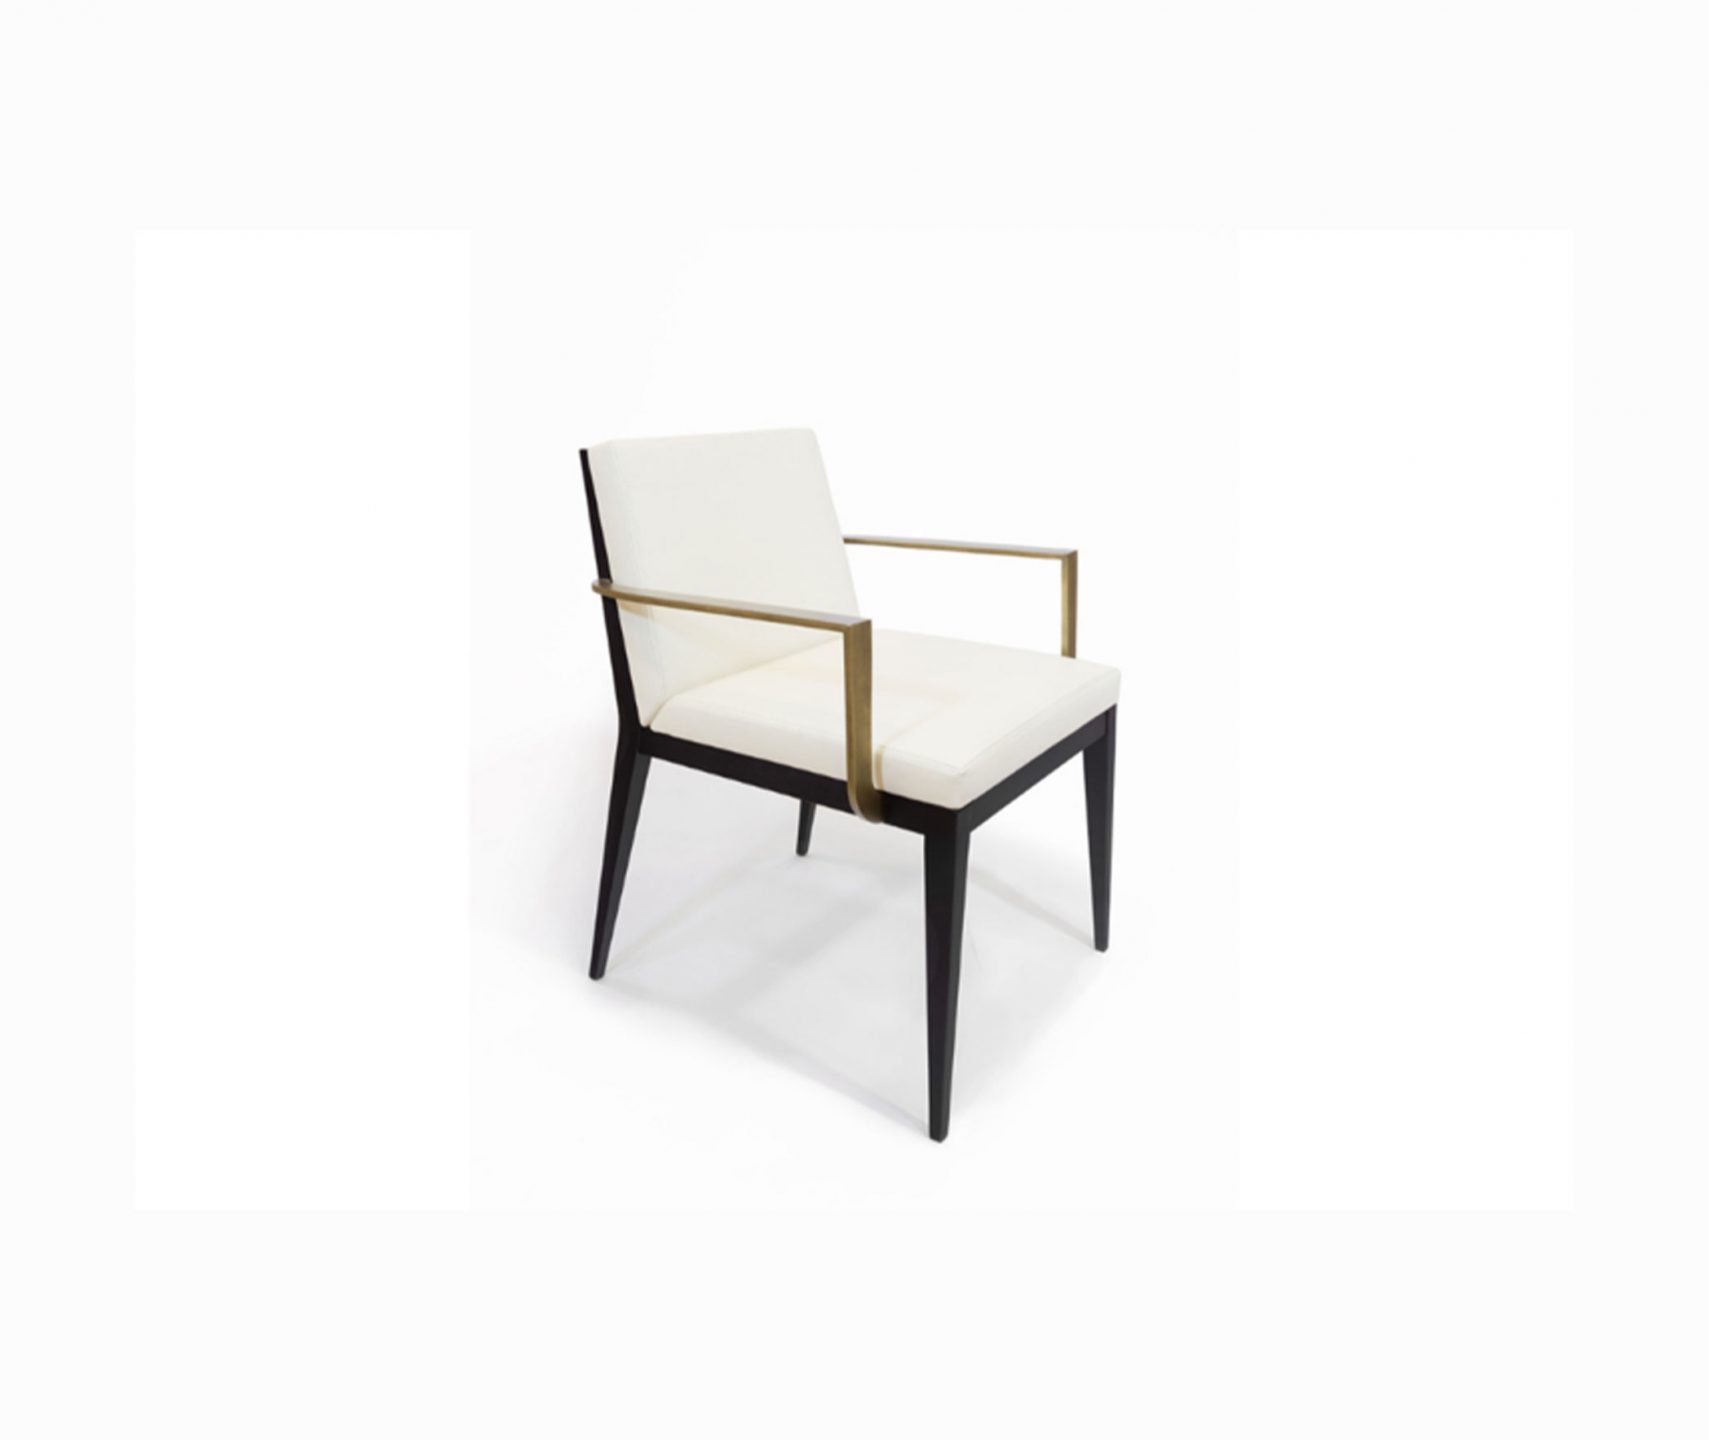 Profiles_Amelie-Dining-Chair-1_int_products